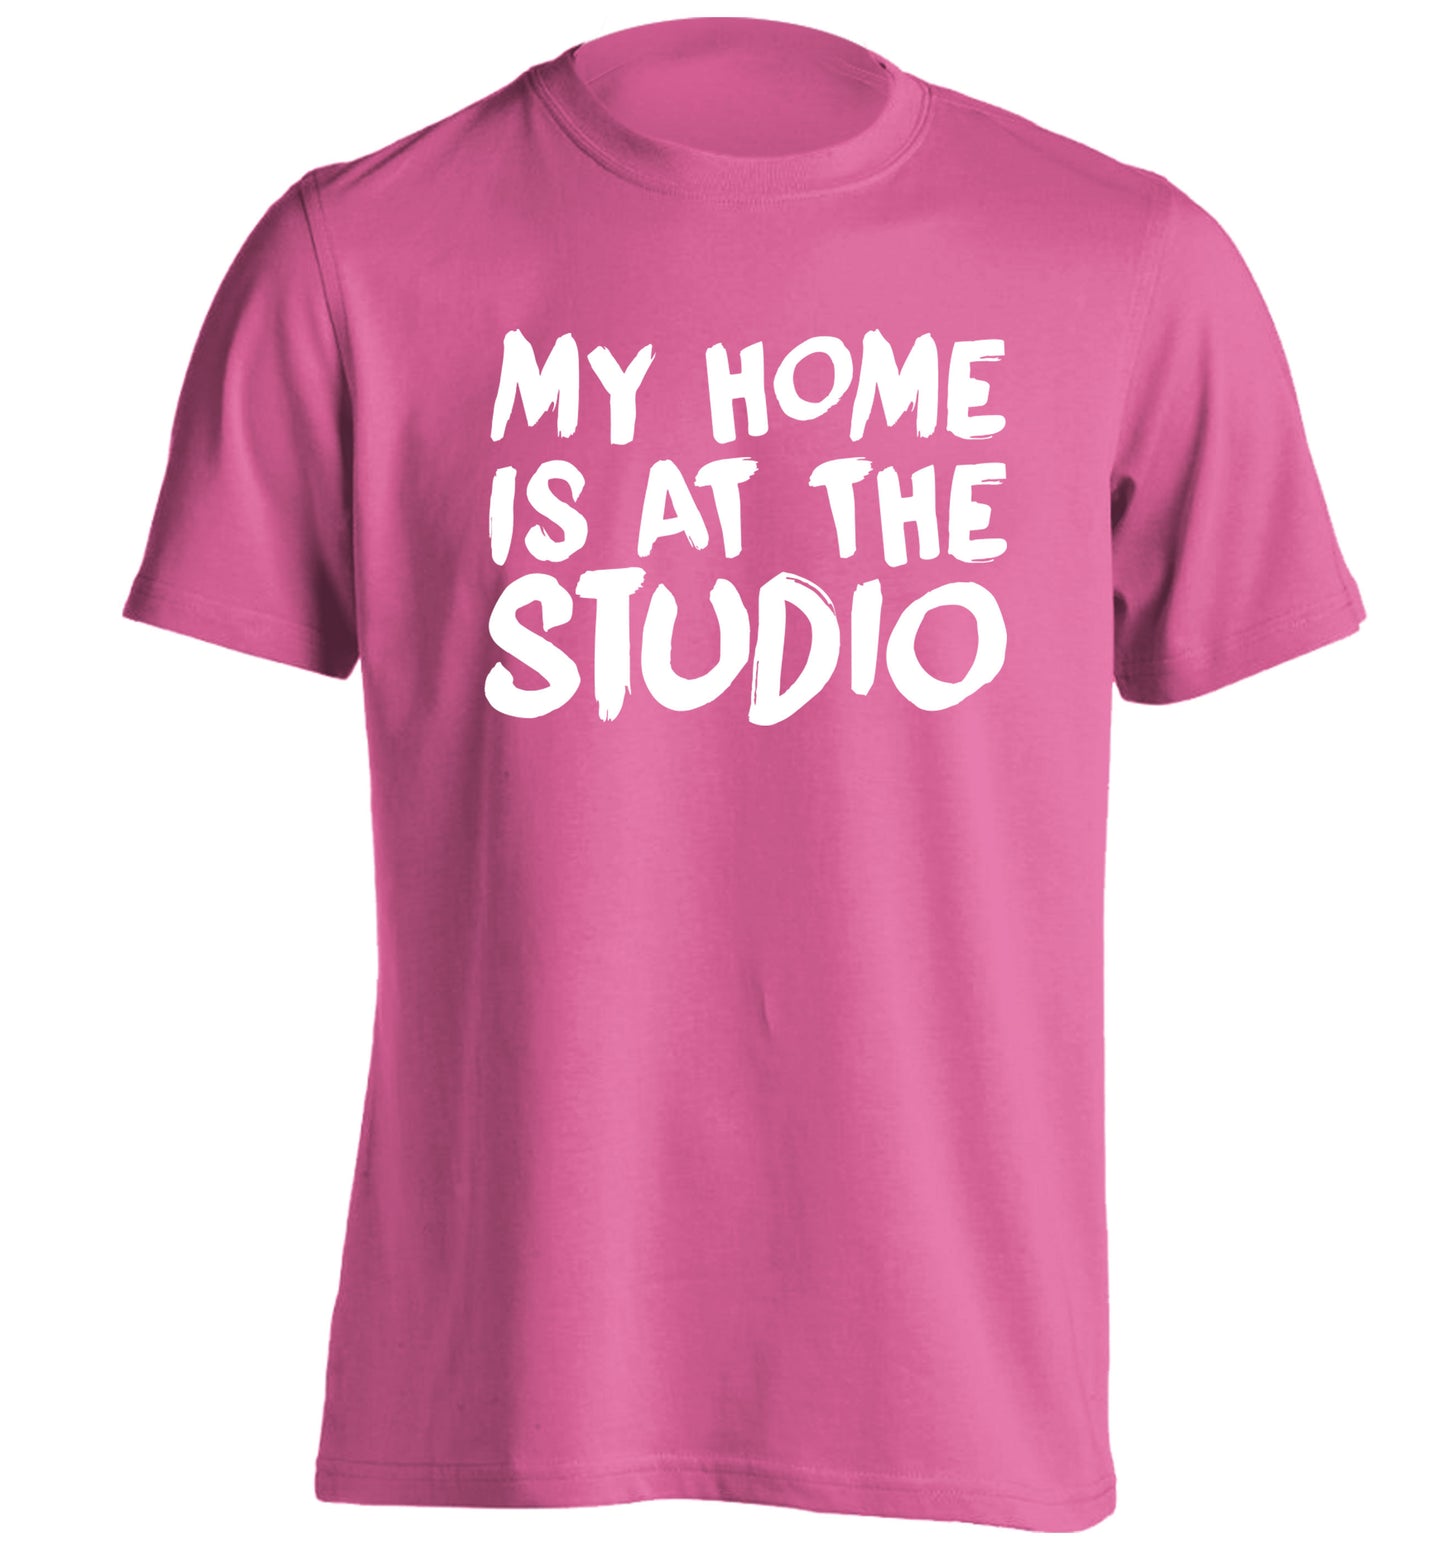 My home is at the studio adults unisex pink Tshirt 2XL